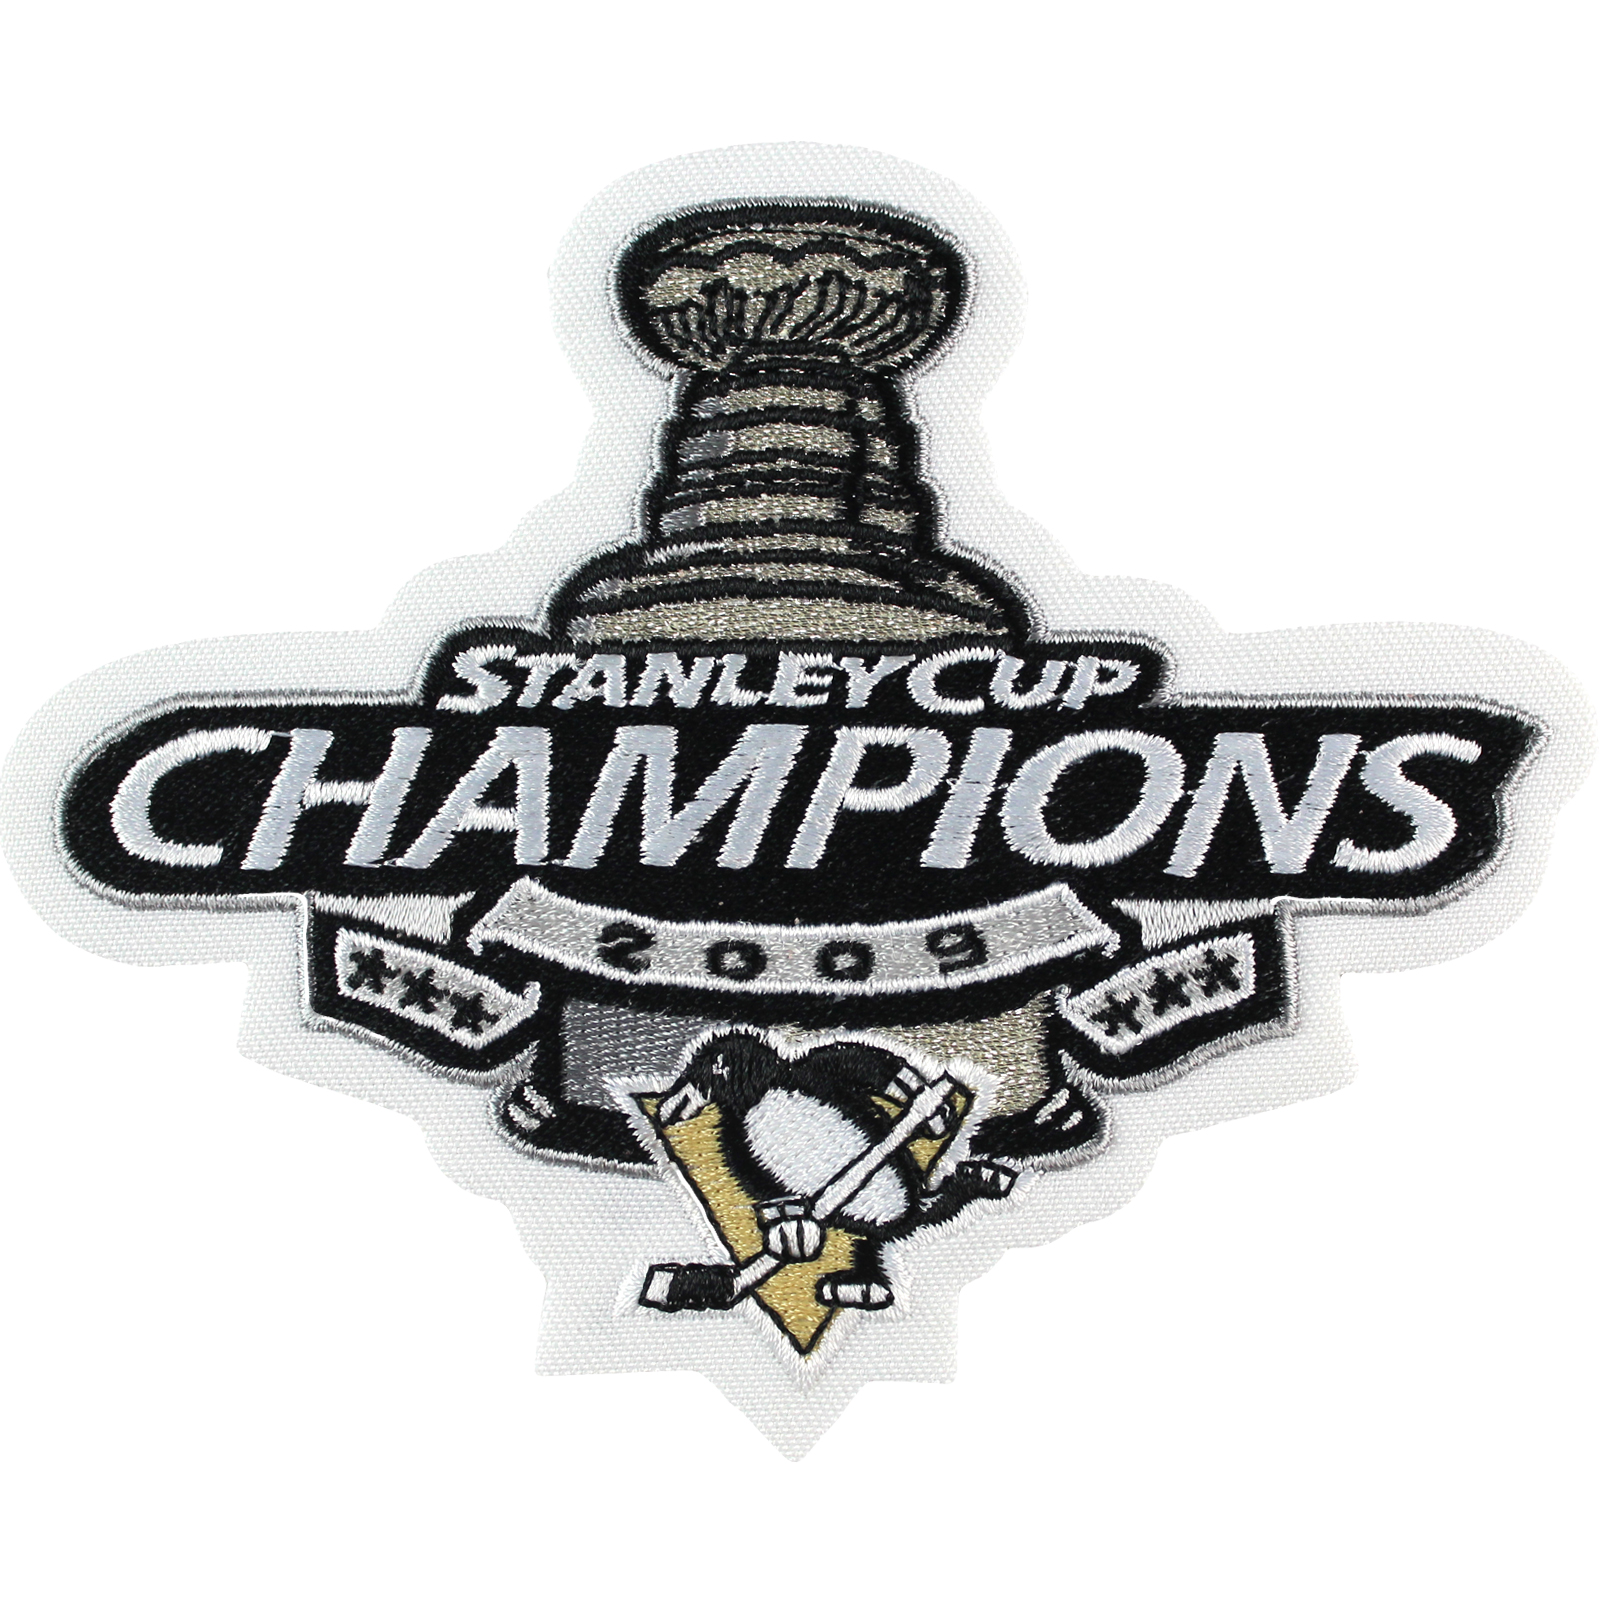 High Resolution Wallpaper | Pittsburgh Penguins 1600x1600 px